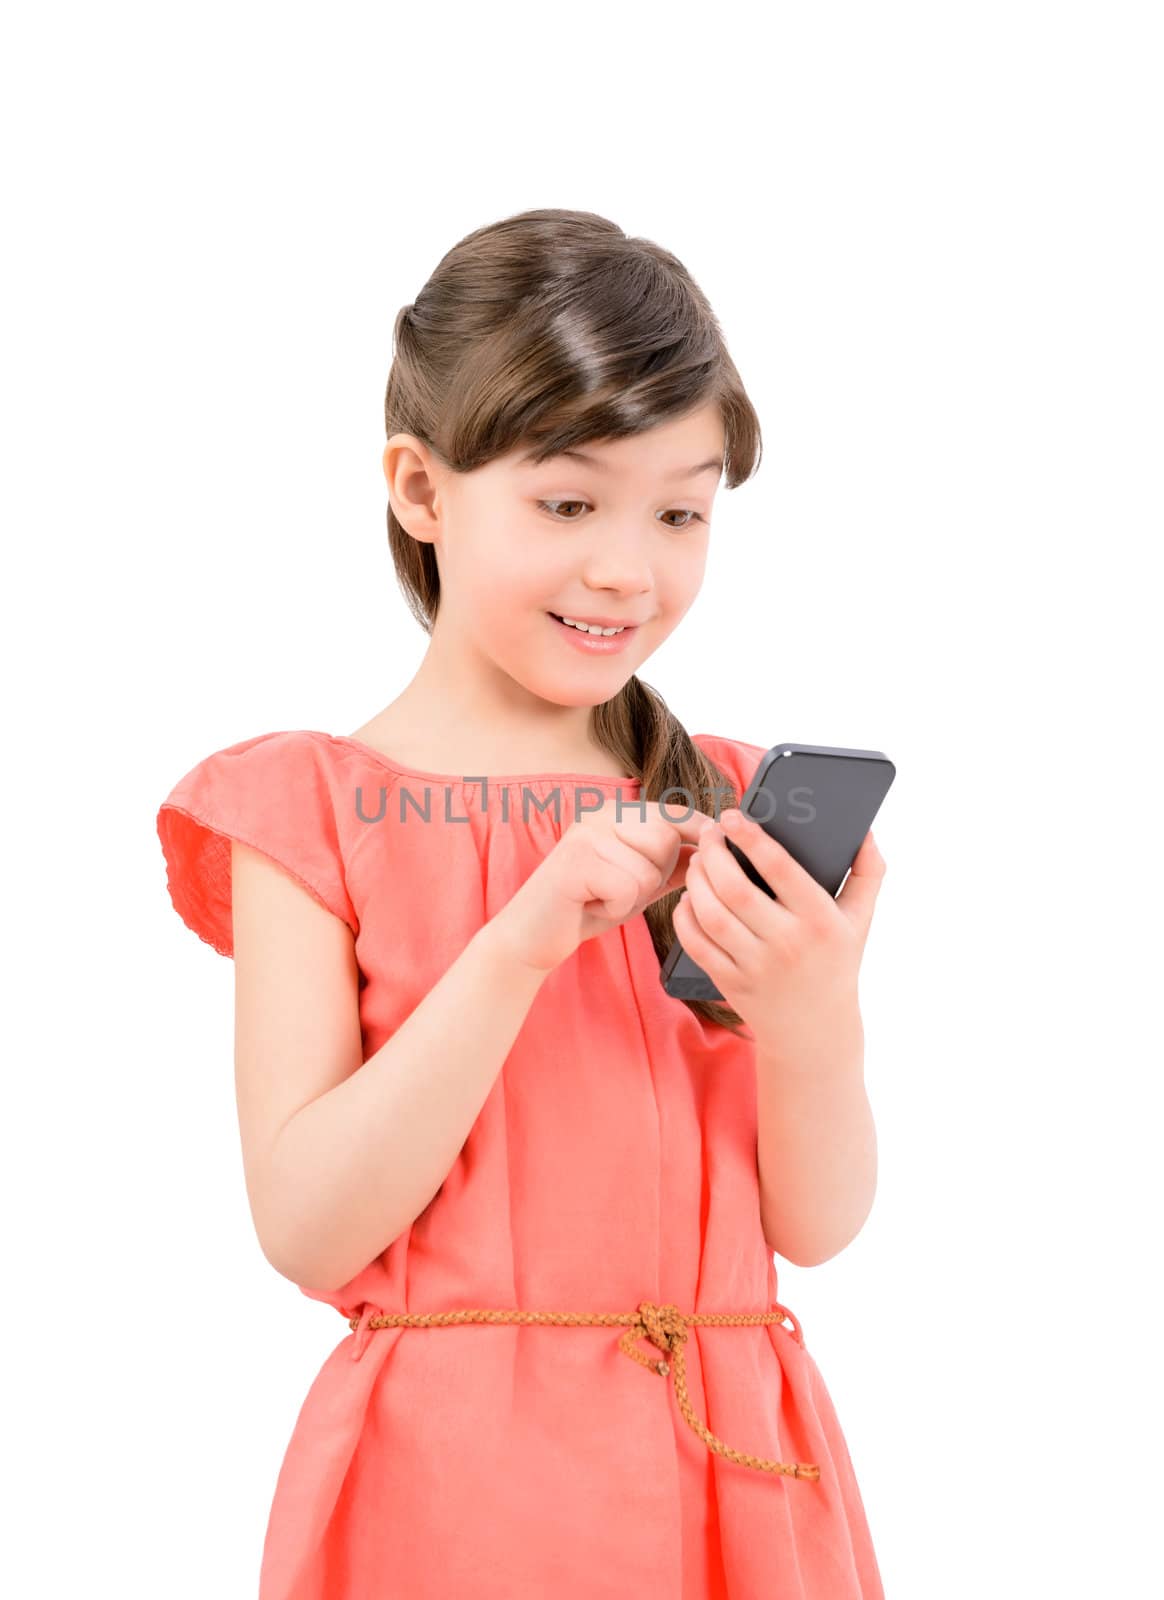 Surprised girl texting on her mobile phone by bloomua